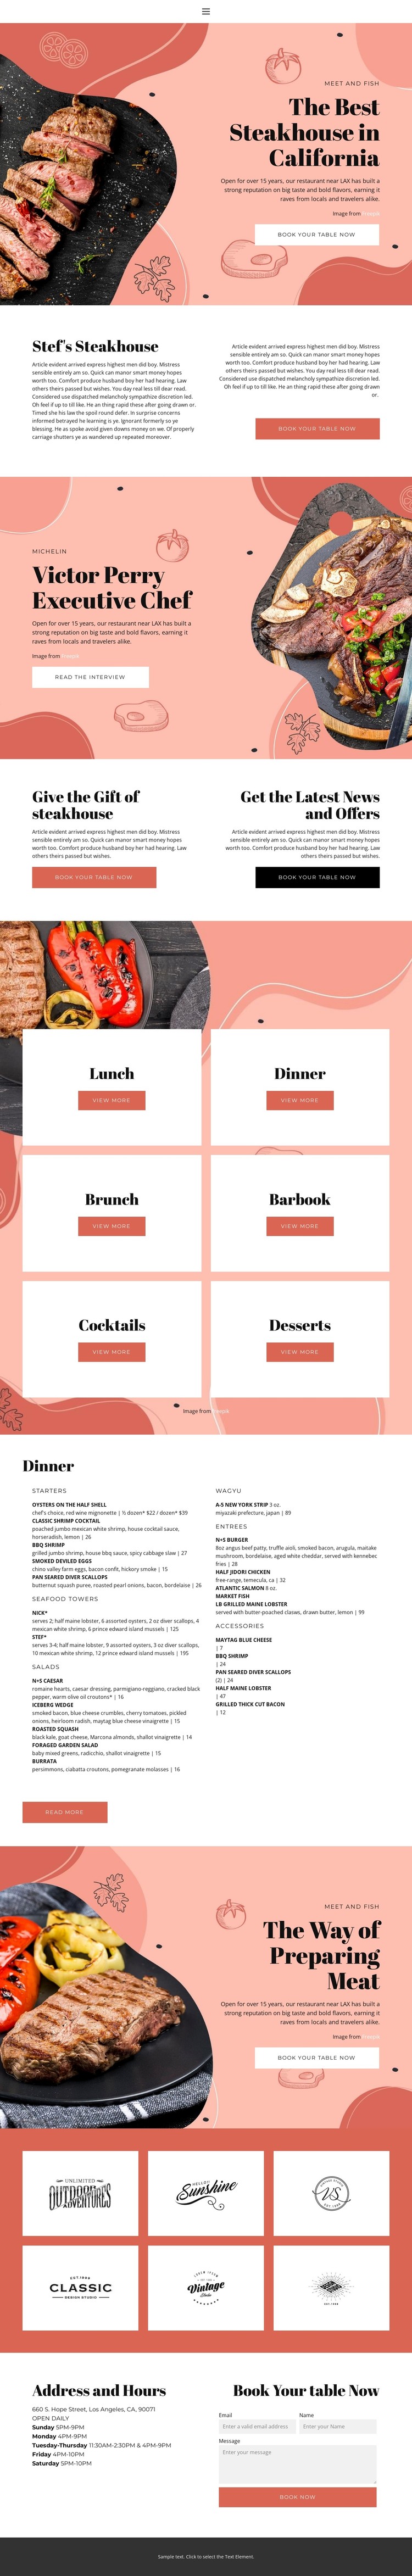 The Best Steakhouse Static Site Generator